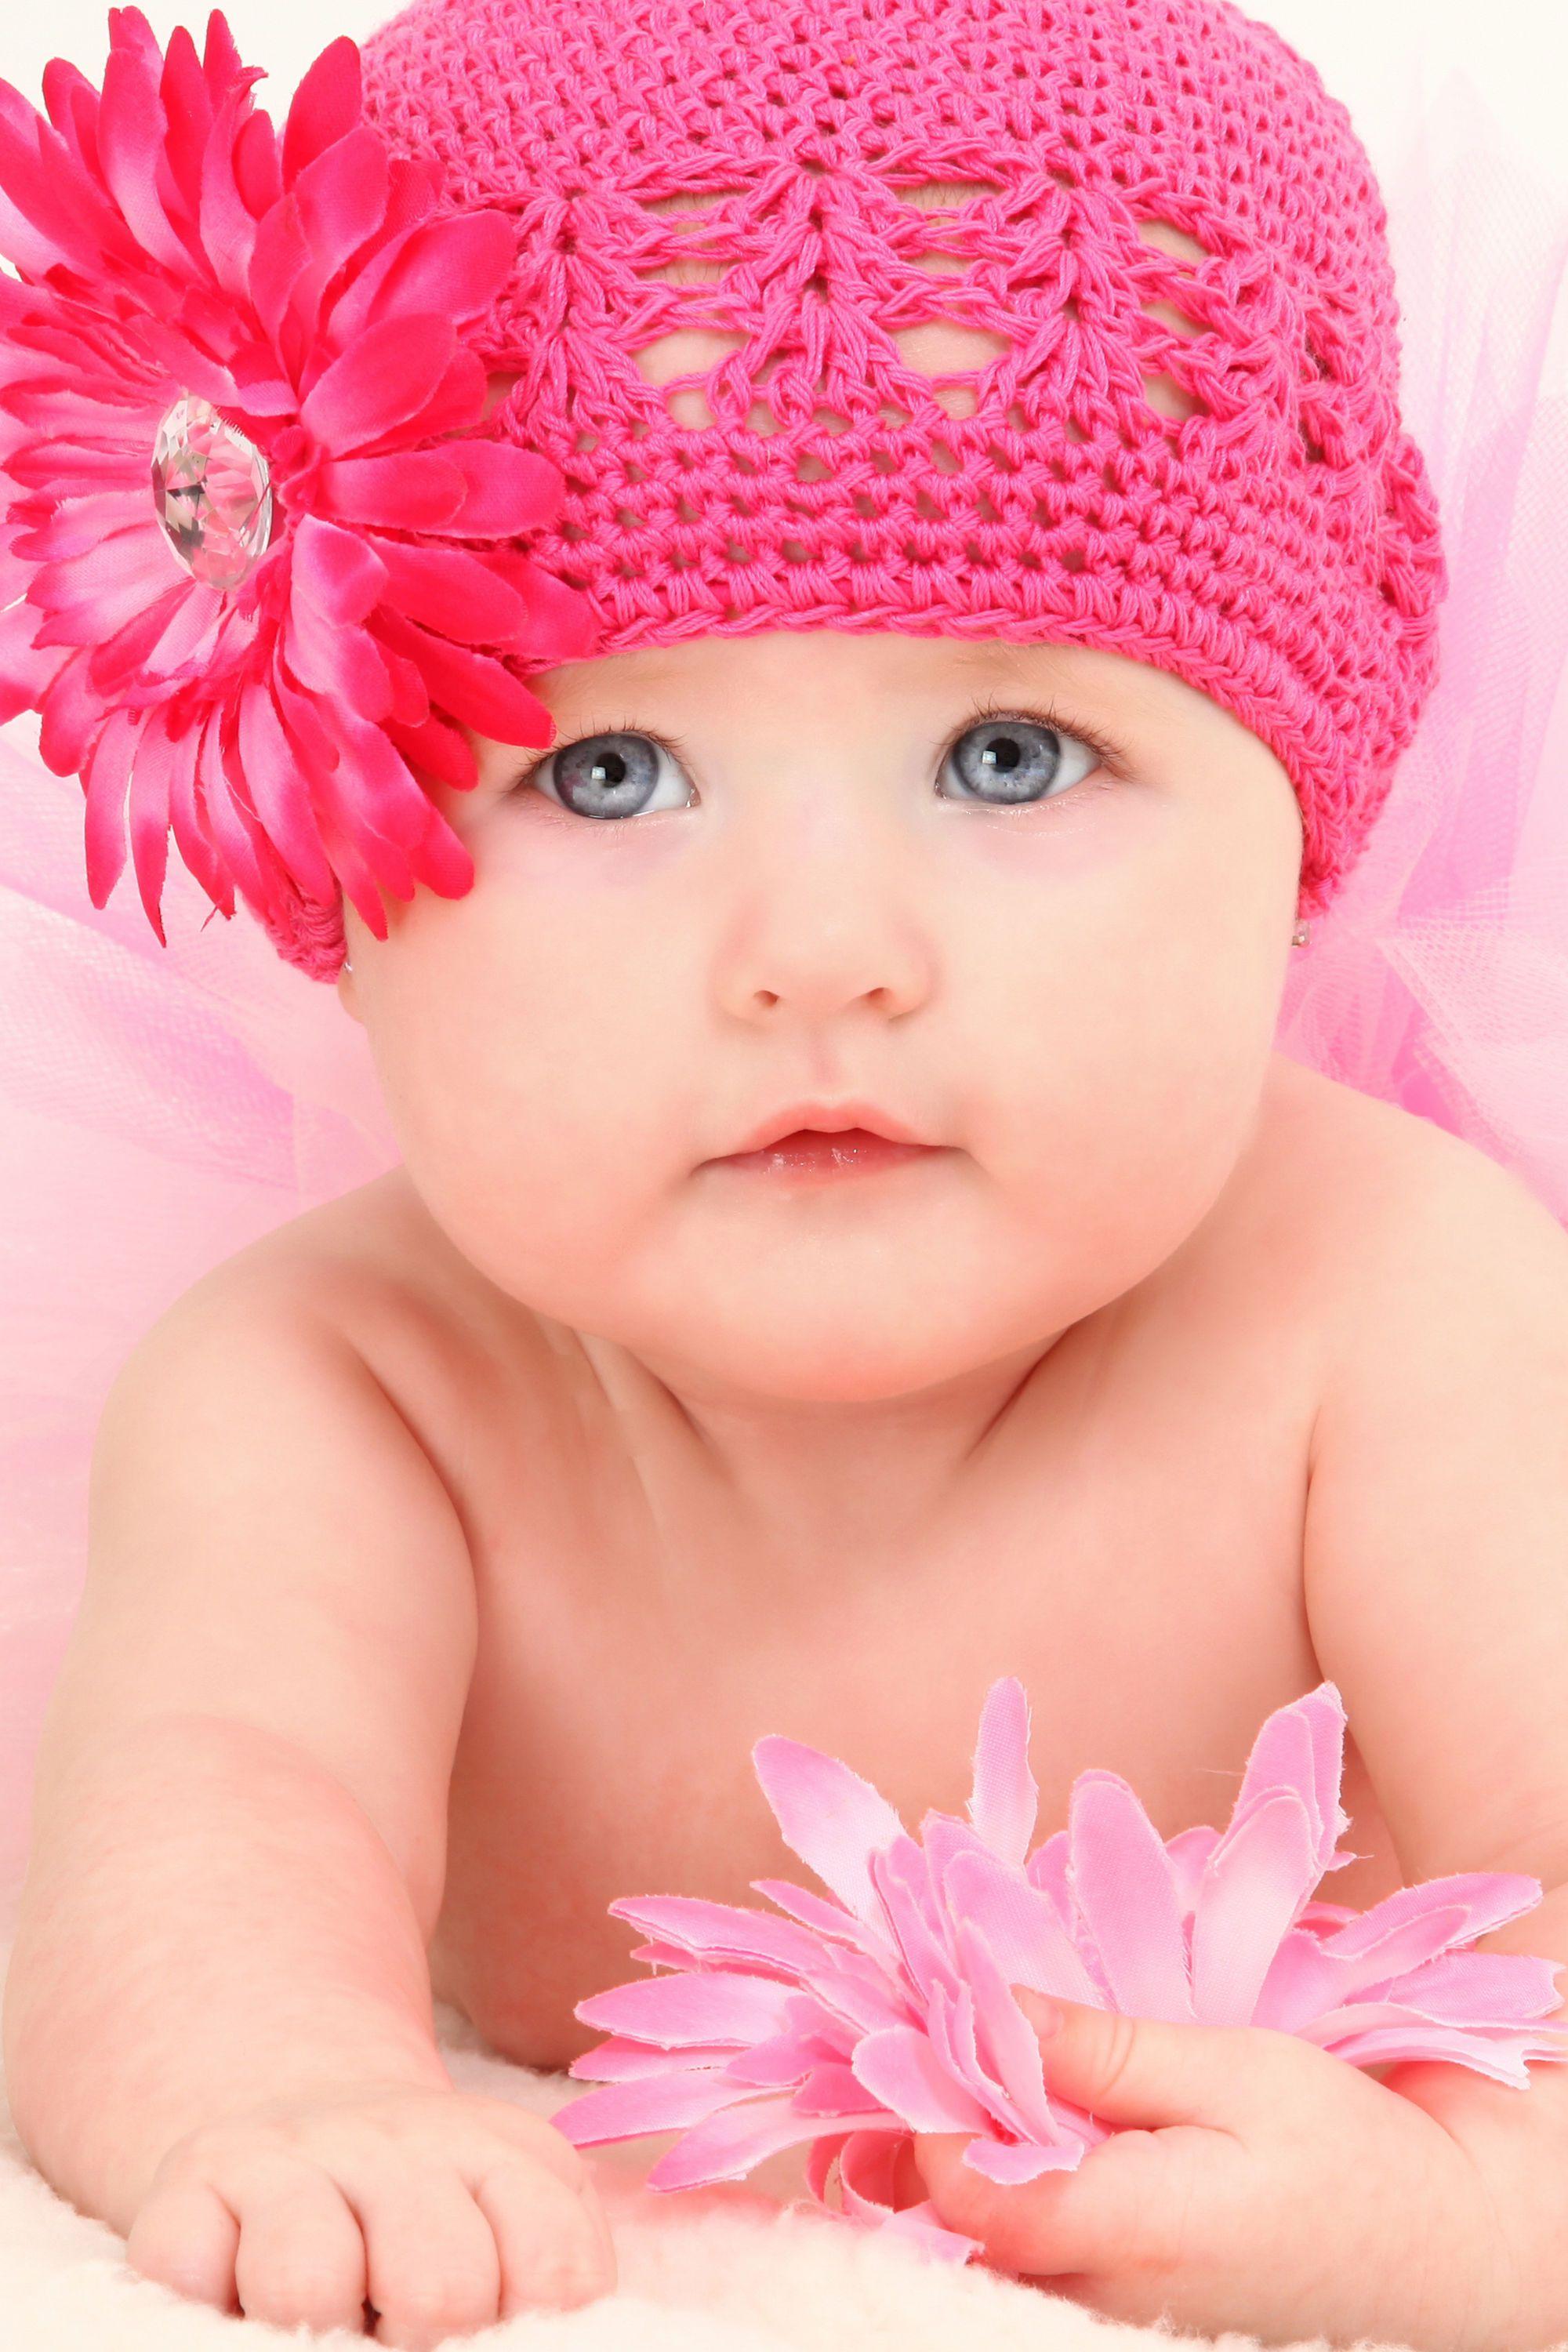 cool baby wallpapers